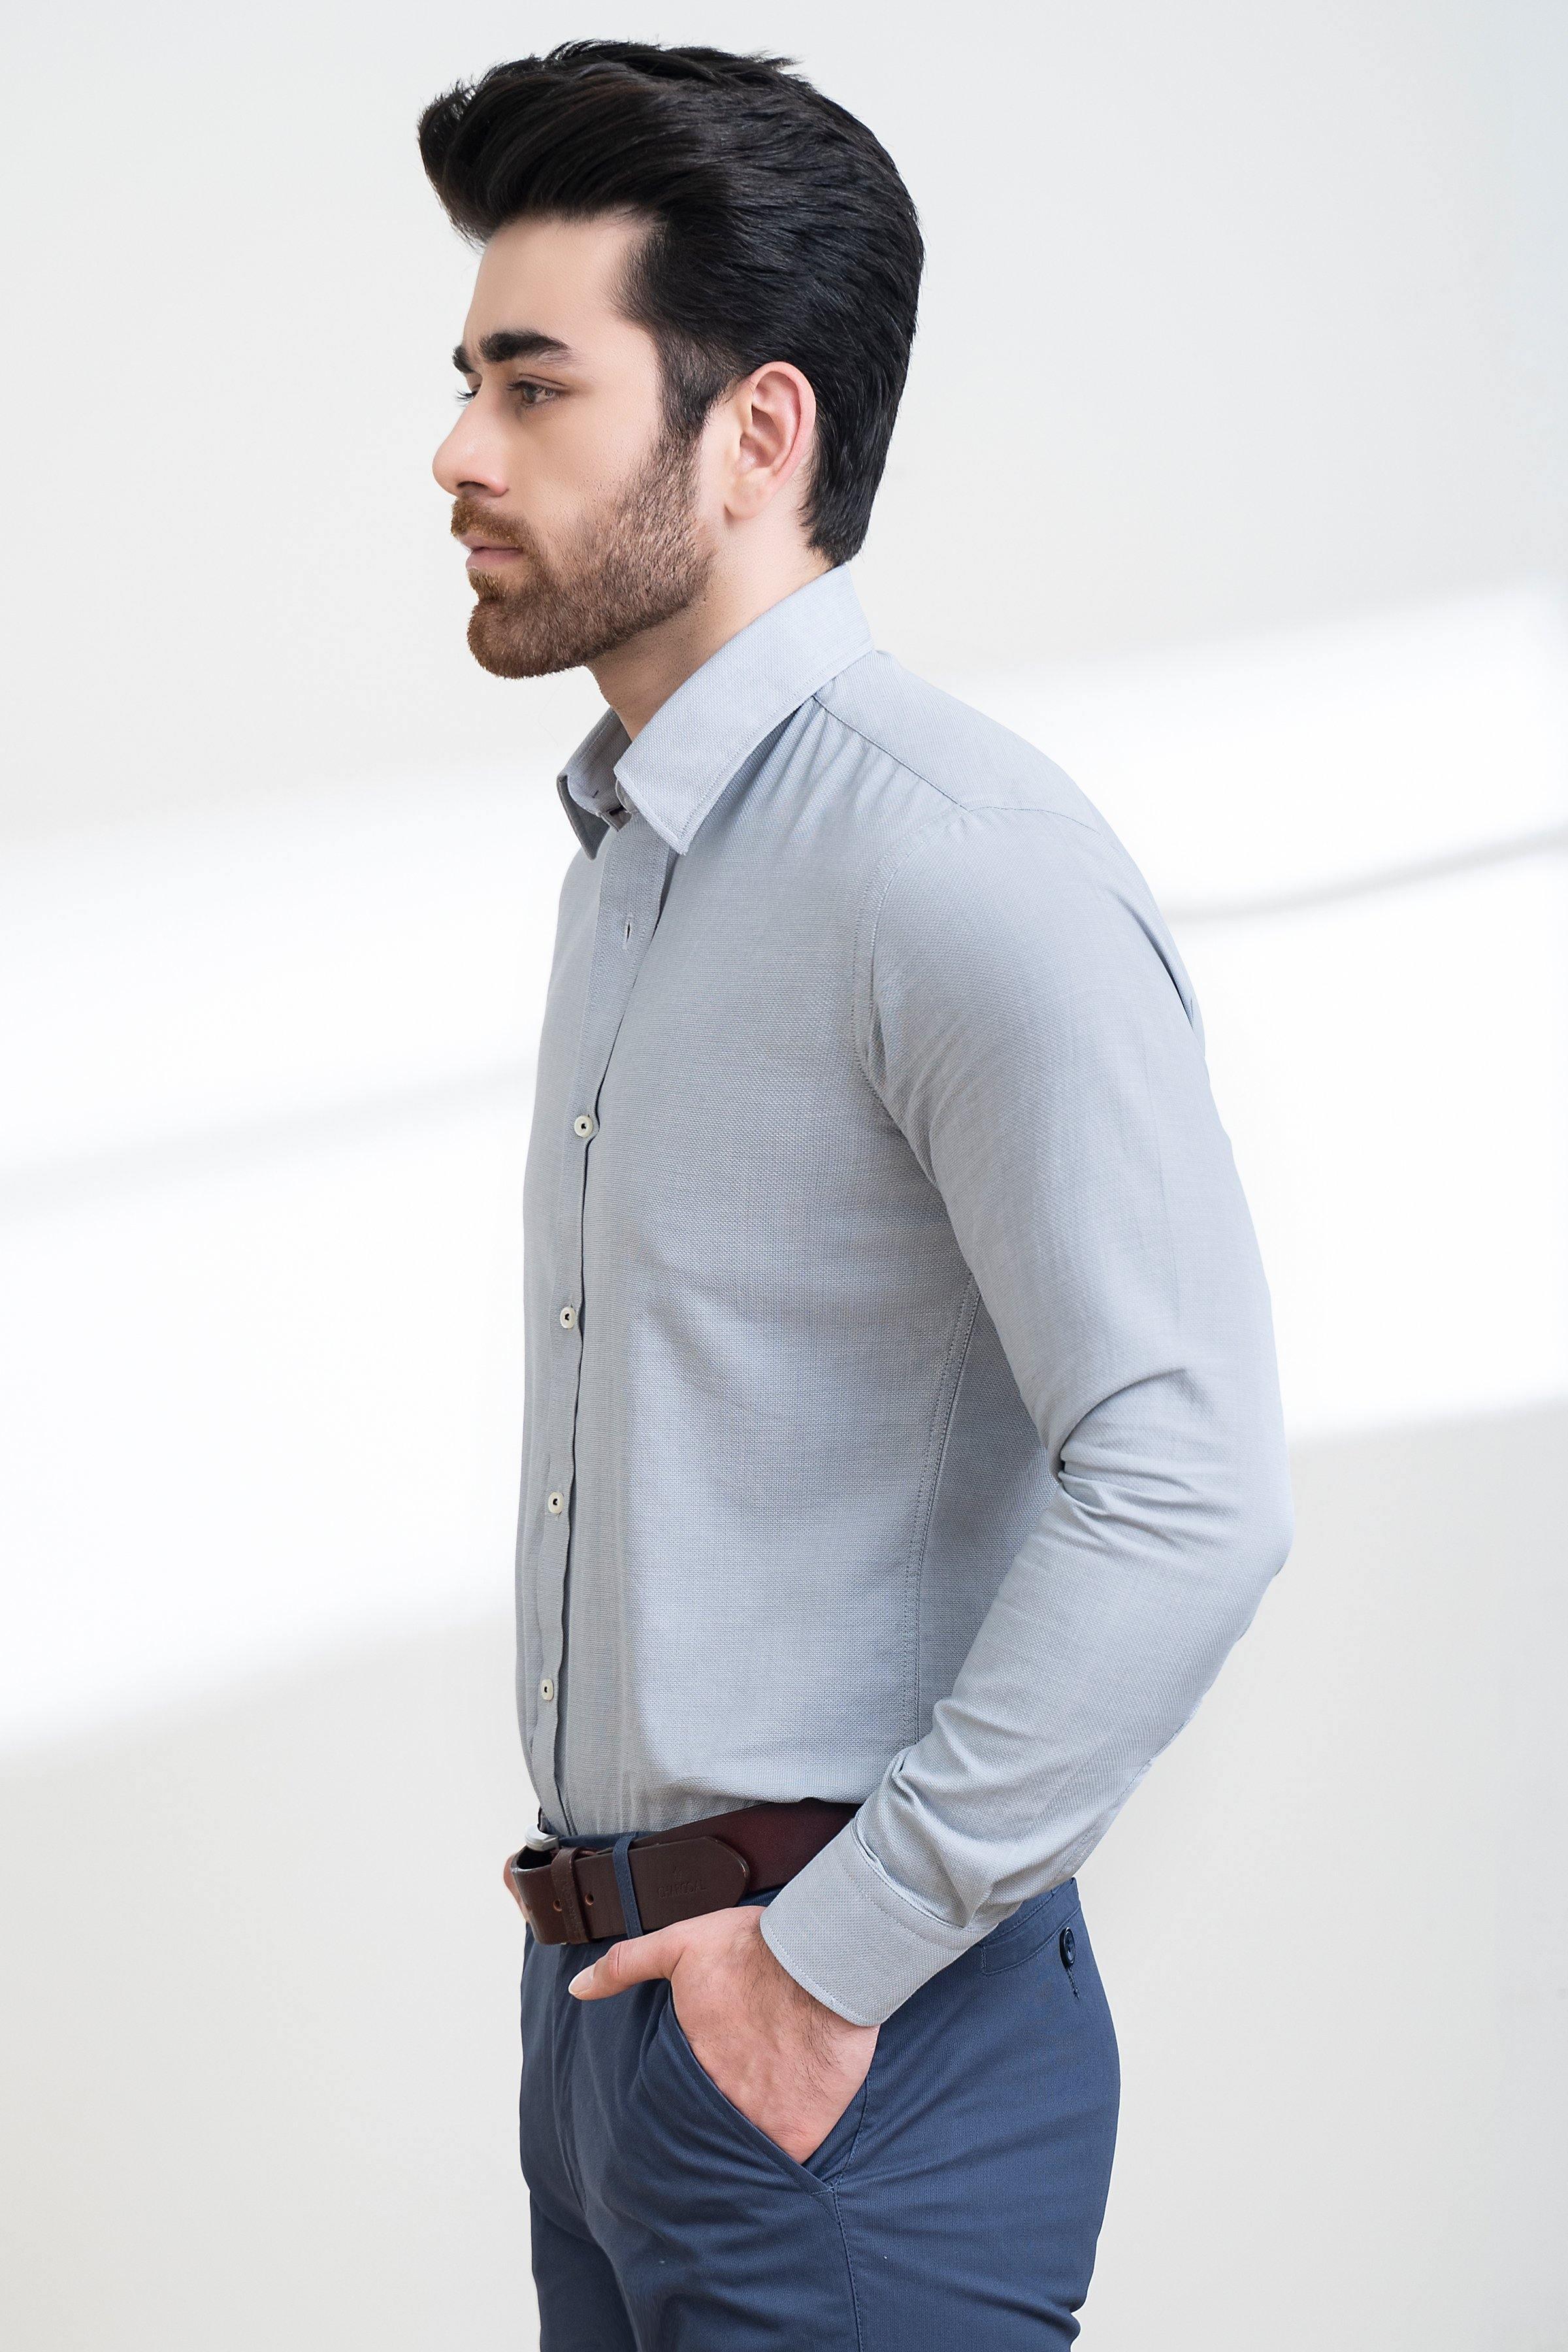 SMART SHIRT BUTTON DOWN FULL SLEEVE LIGHT GREY at Charcoal Clothing